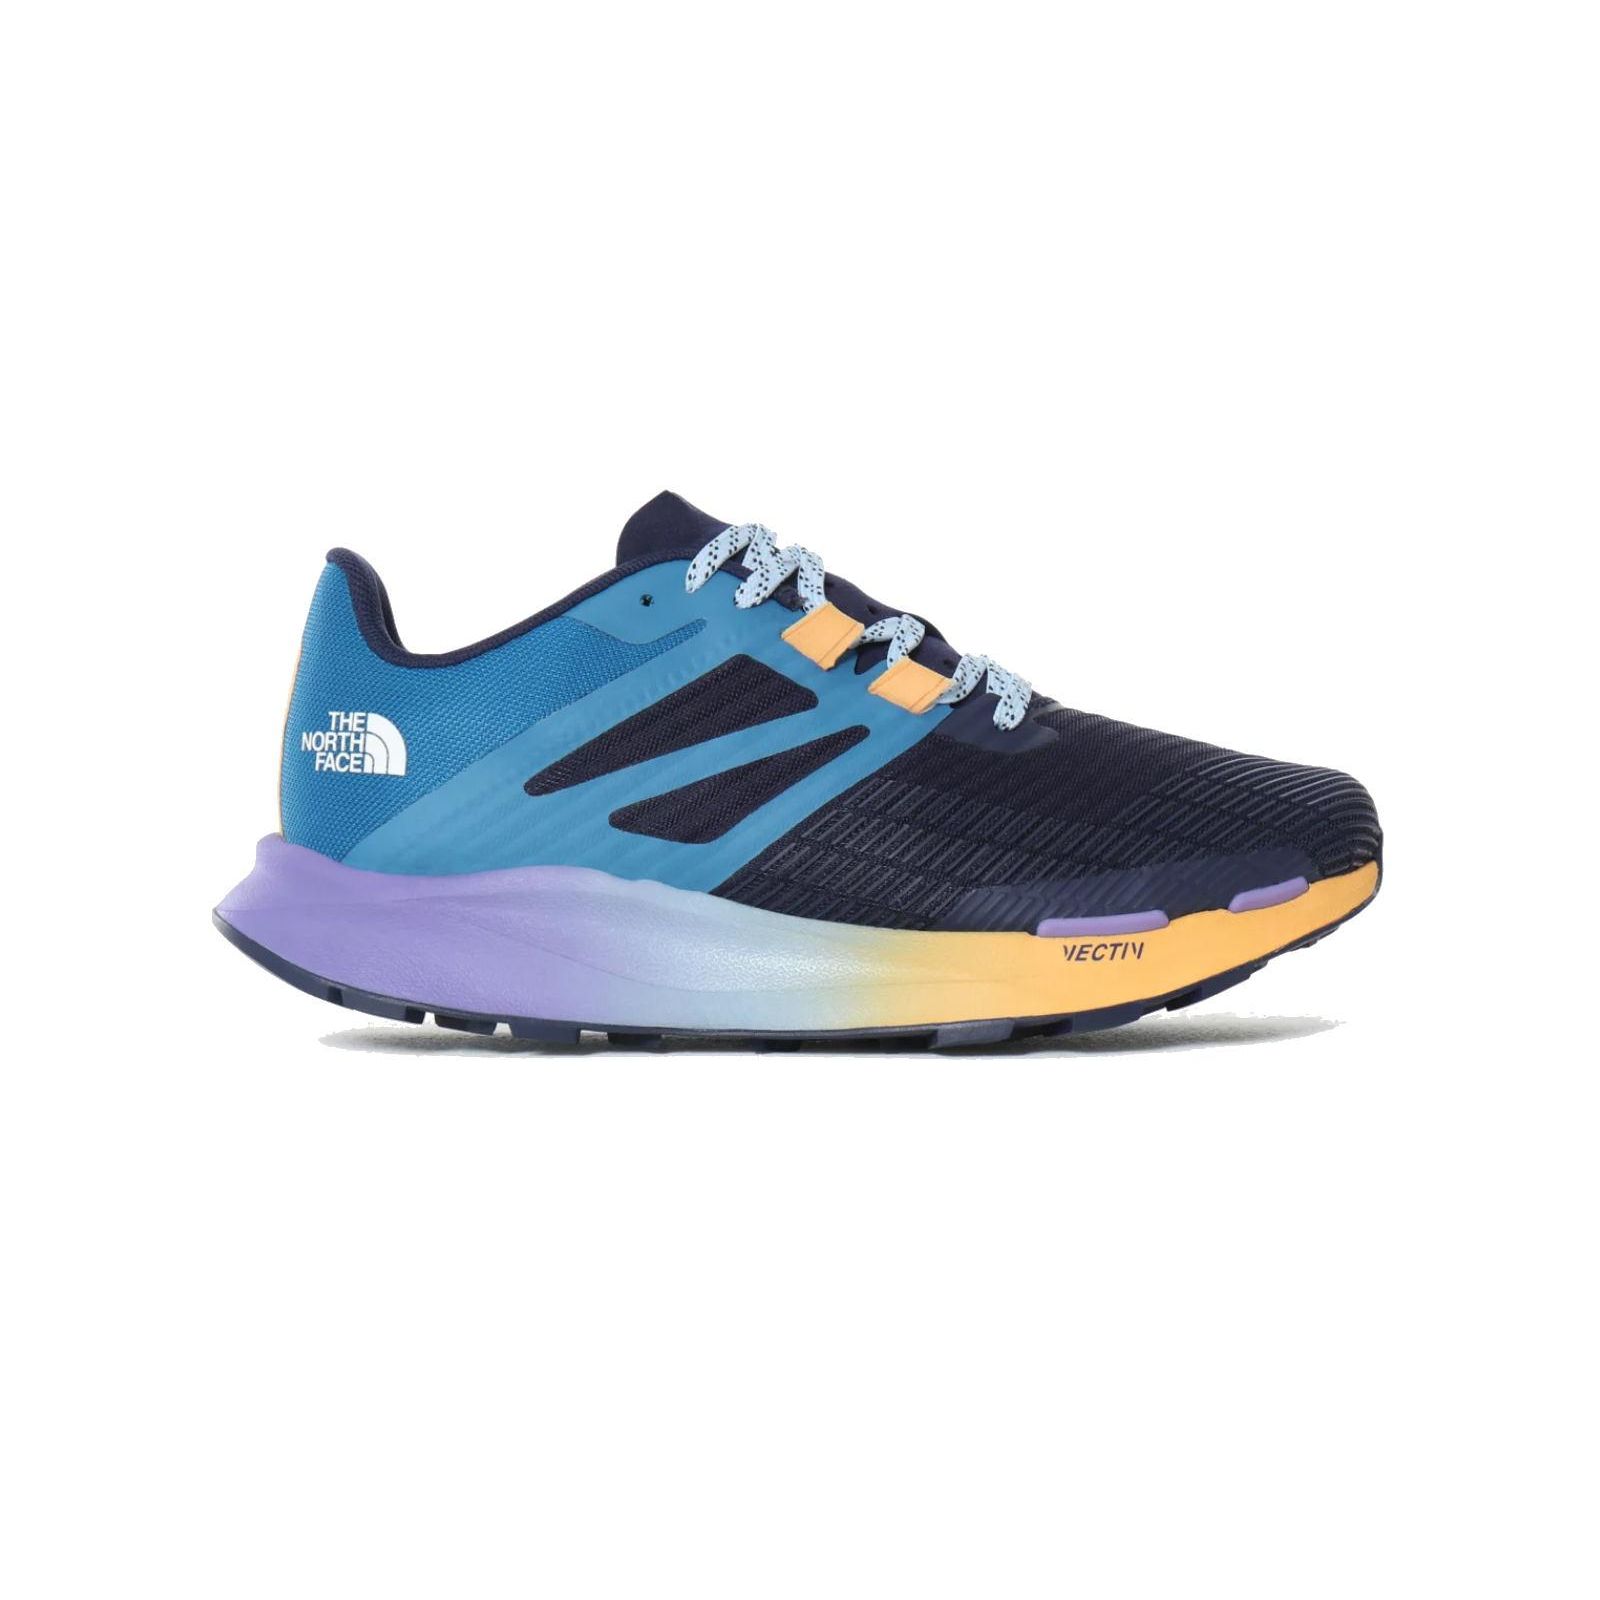 North Face-VECTIV EMINUS MUJER THENF0A5G3M50H